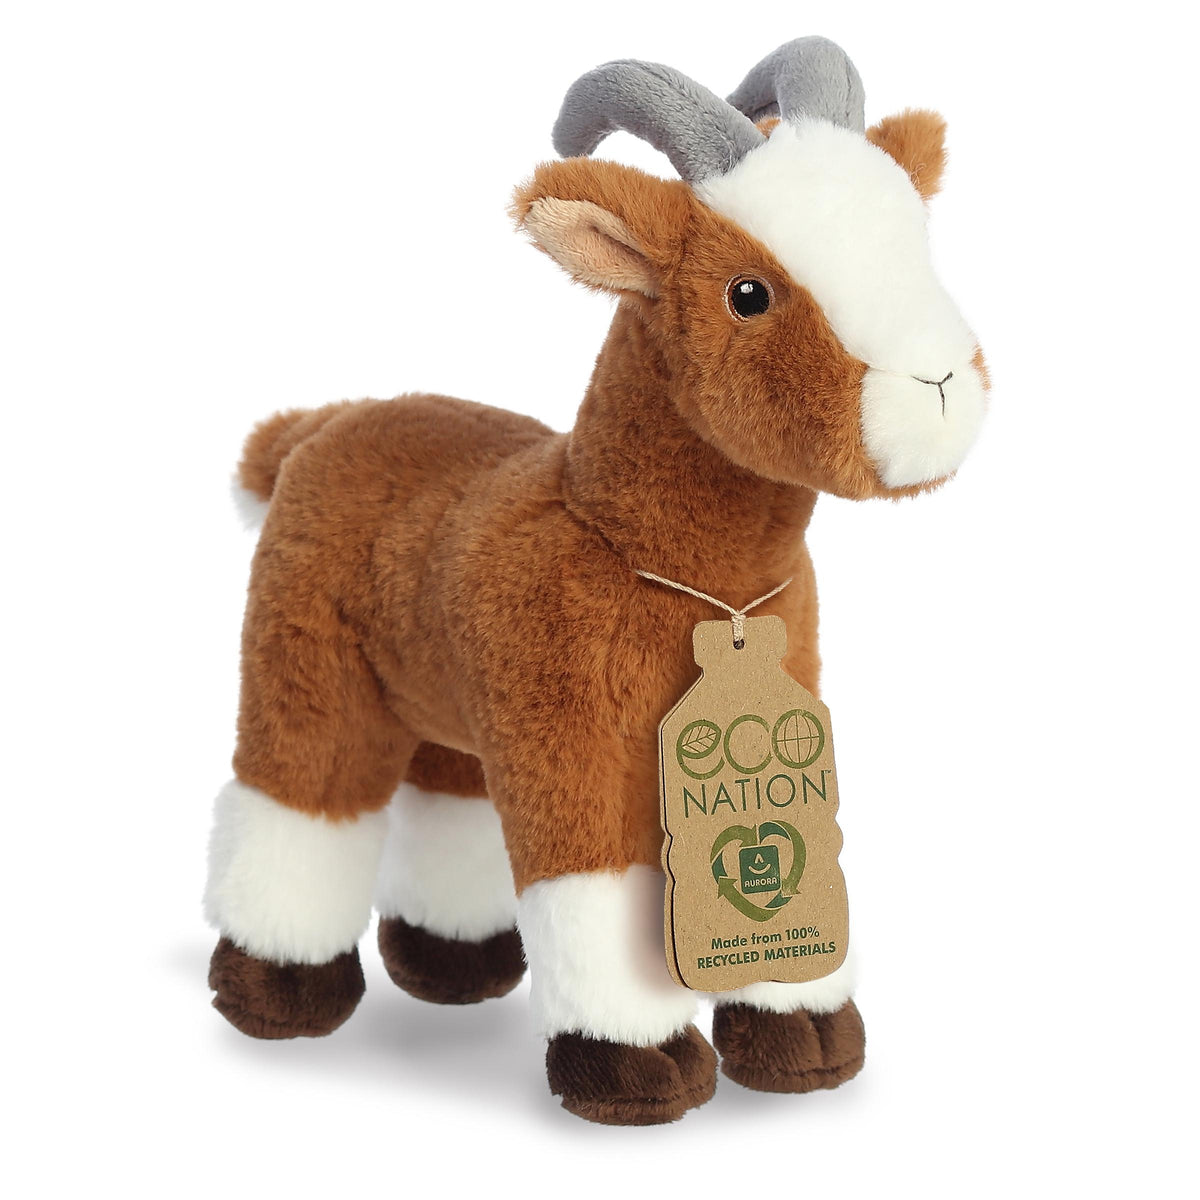 Eco Nation Goat plush from Aurora, showcasing detailed craftsmanship and a gentle expression